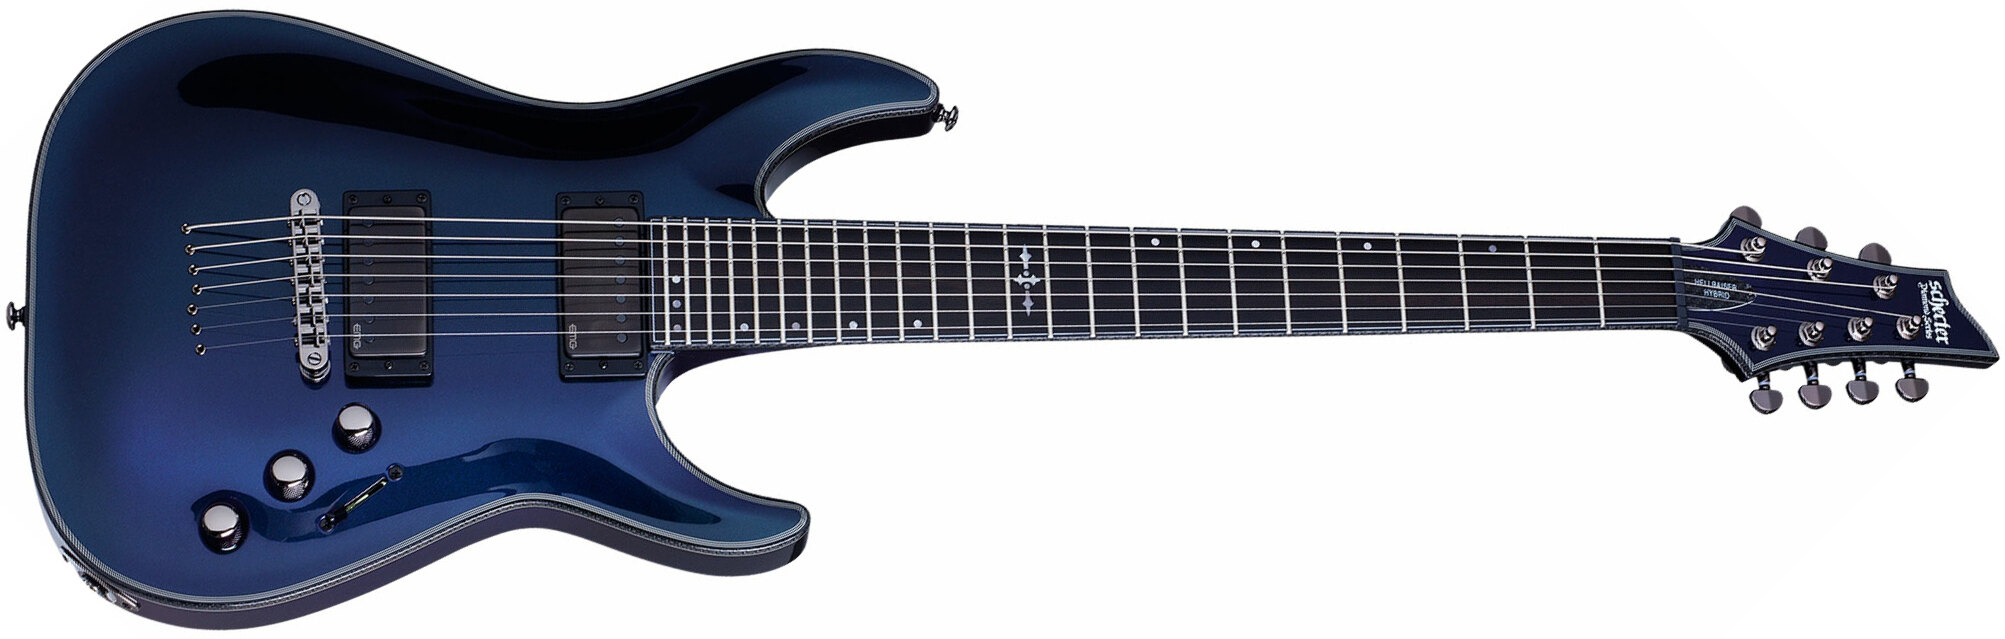 Schecter C-7 Hellraiser Hybrid 7c 2h Emg Ht Eb - Ultra Violet - 7 string electric guitar - Main picture